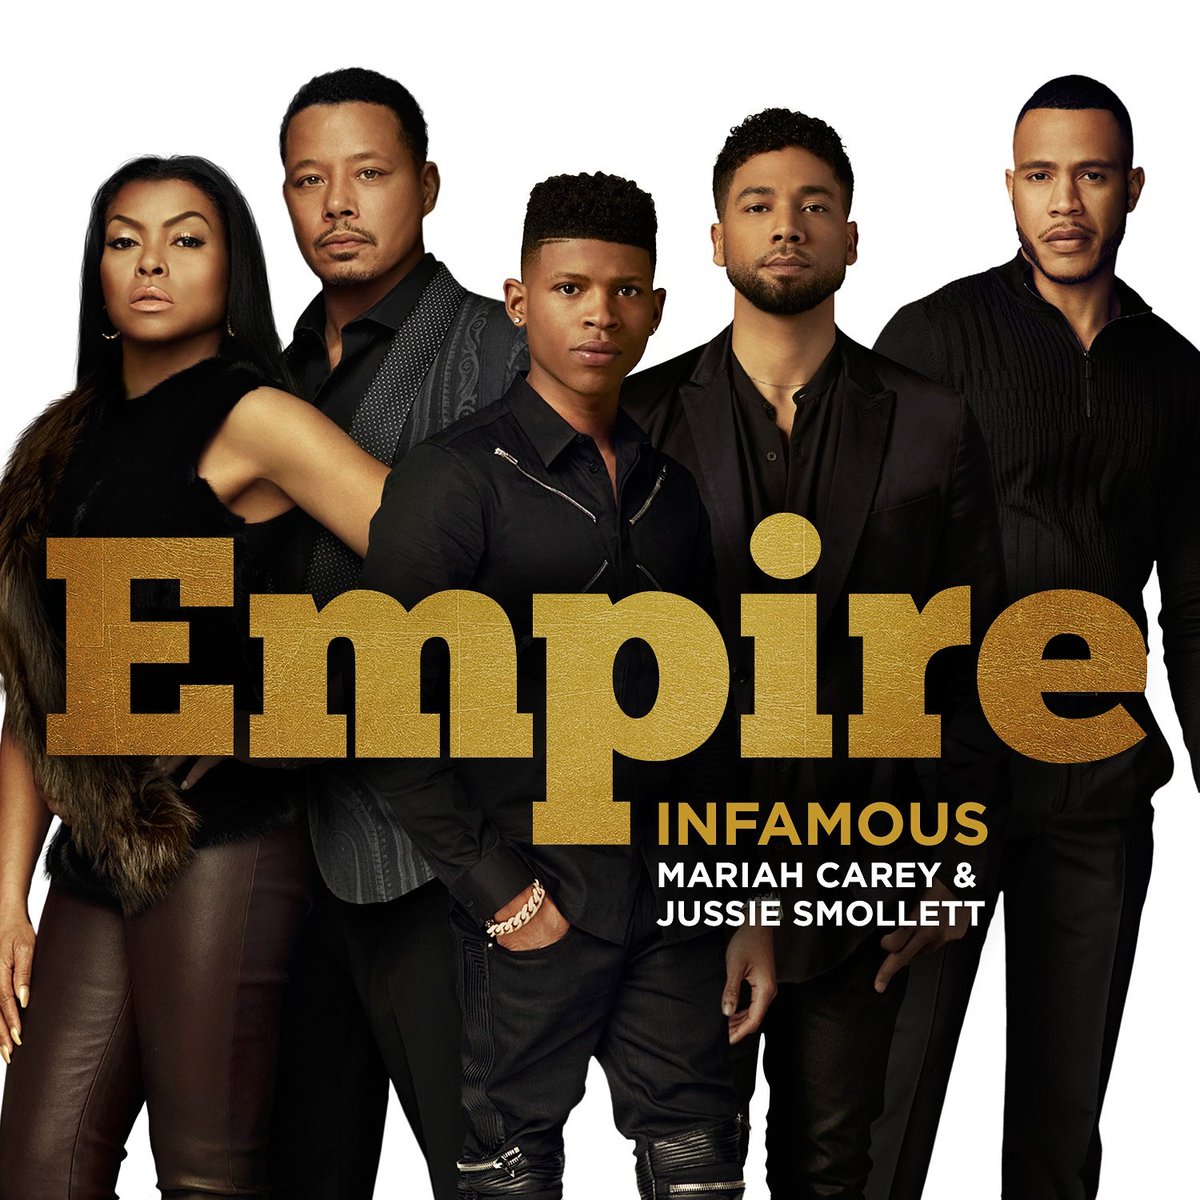 #Infamous is available now. Download and listen before next week!! @JussieSmollett #Empire https://t.co/P1AFSp85Z1 https://t.co/3BSsT1WG9N